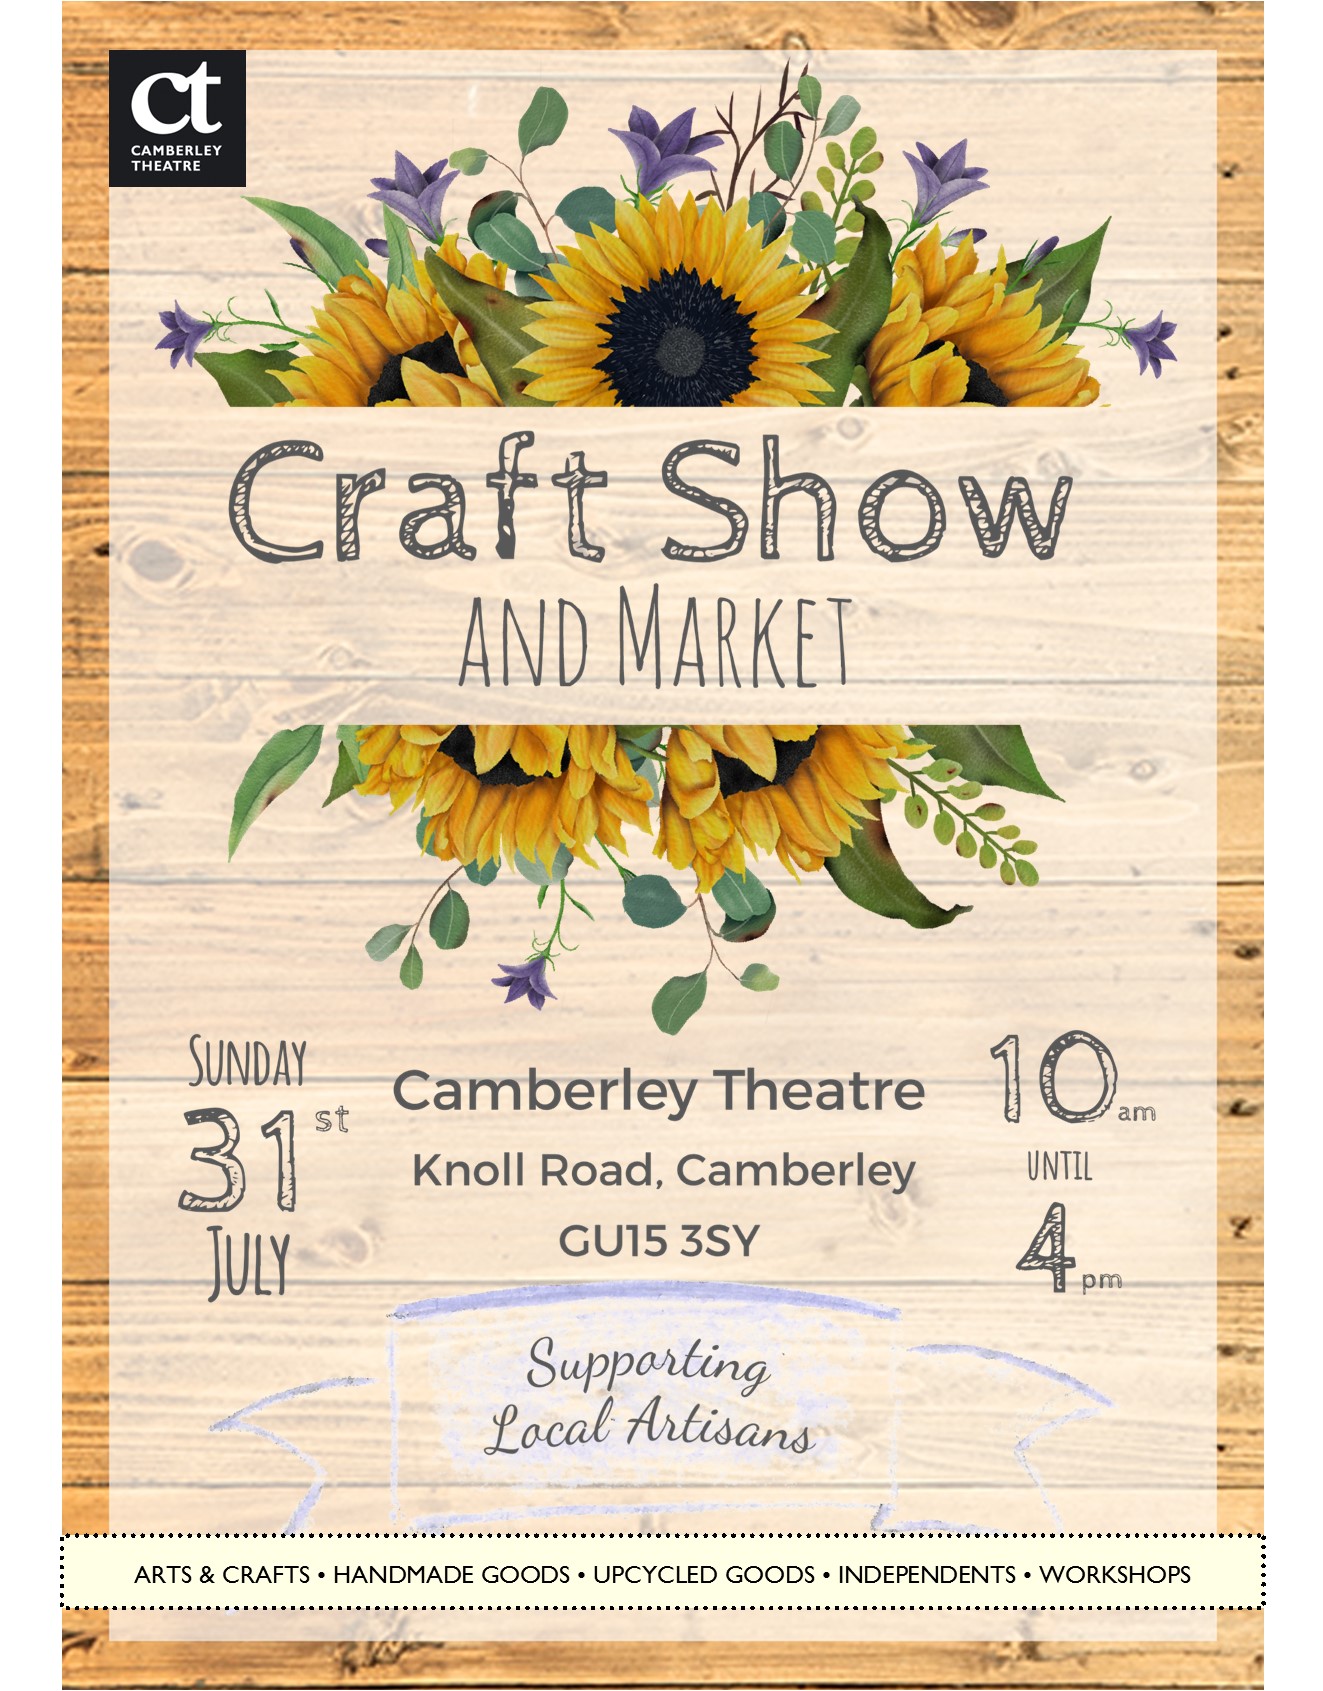 Event image for the Craft Fair at Camberley Theatre